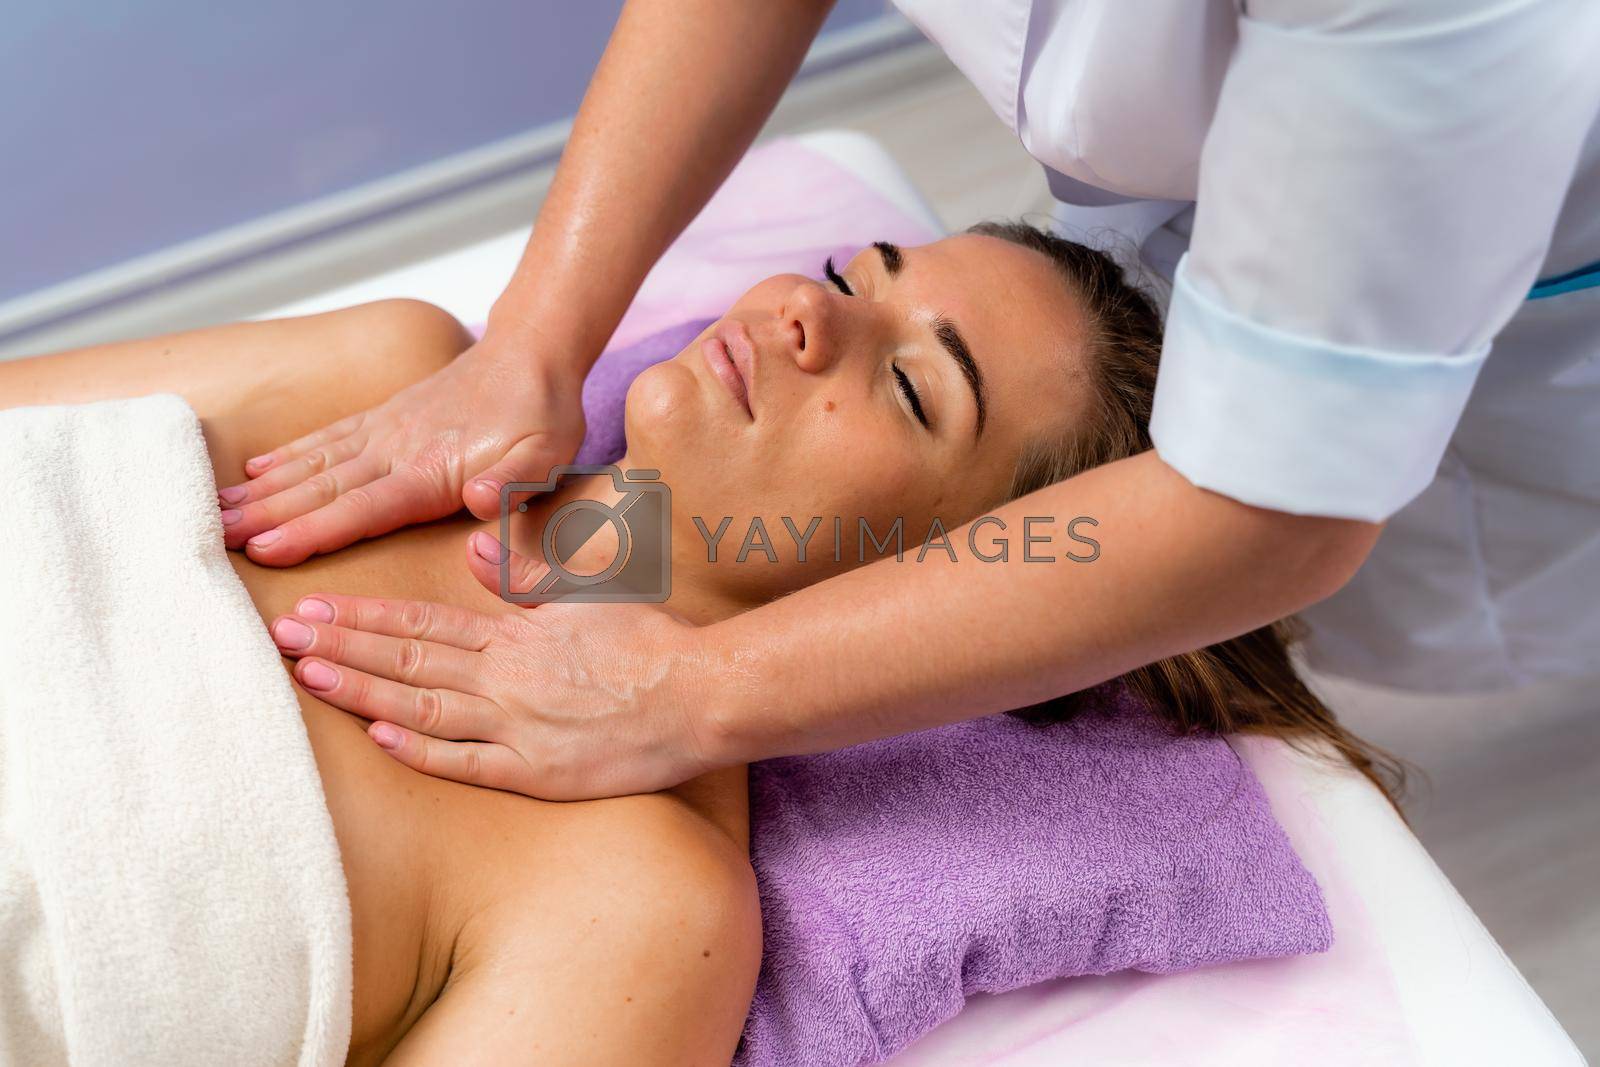 Facial massage. A woman is given a massage in a beauty salon. Close-up.